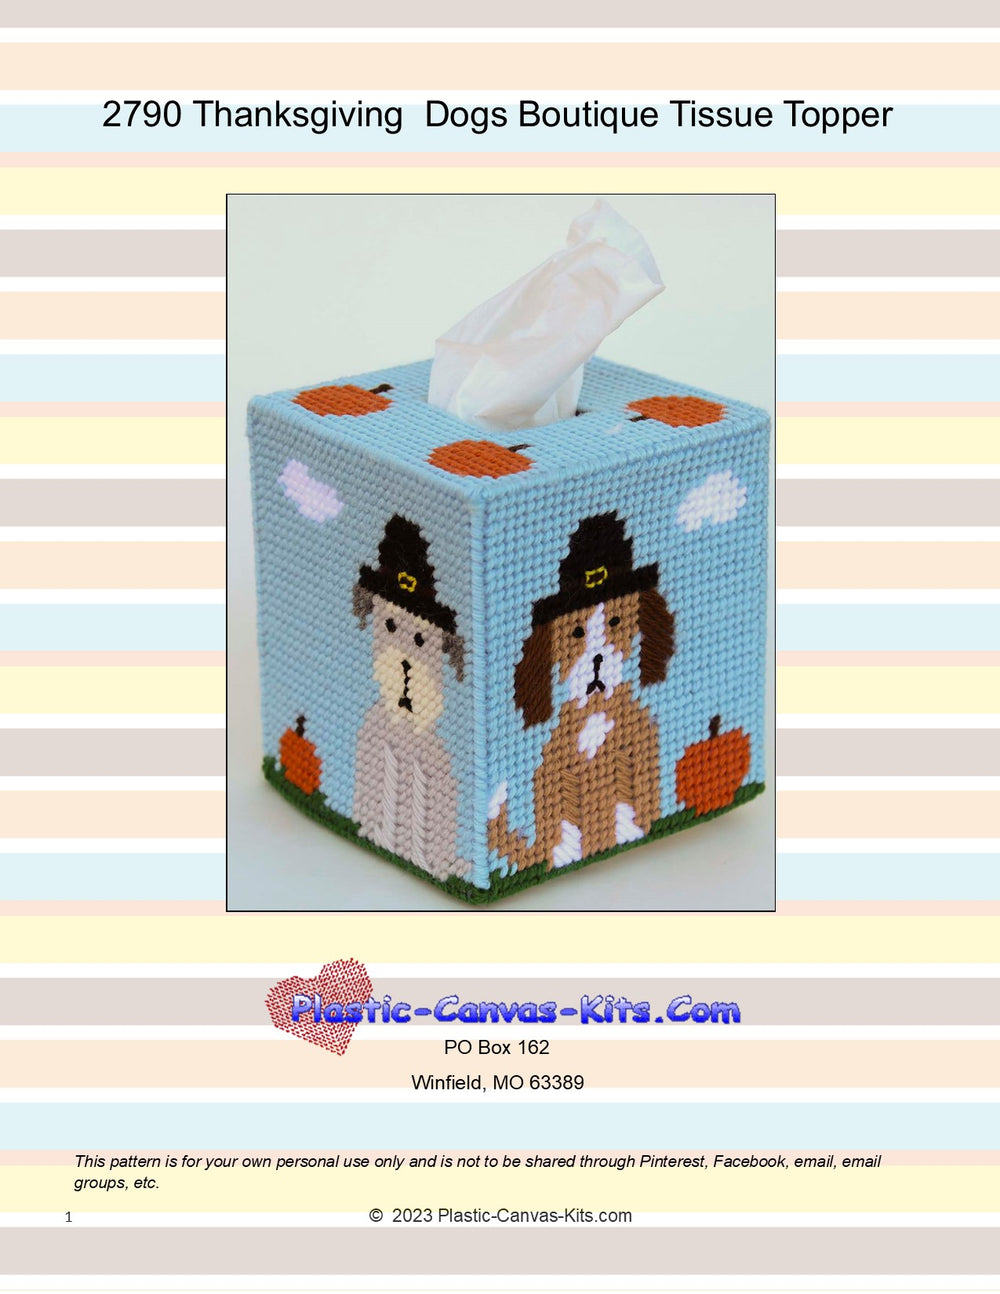 Thanksgiving Dogs Boutique Tissue Topper